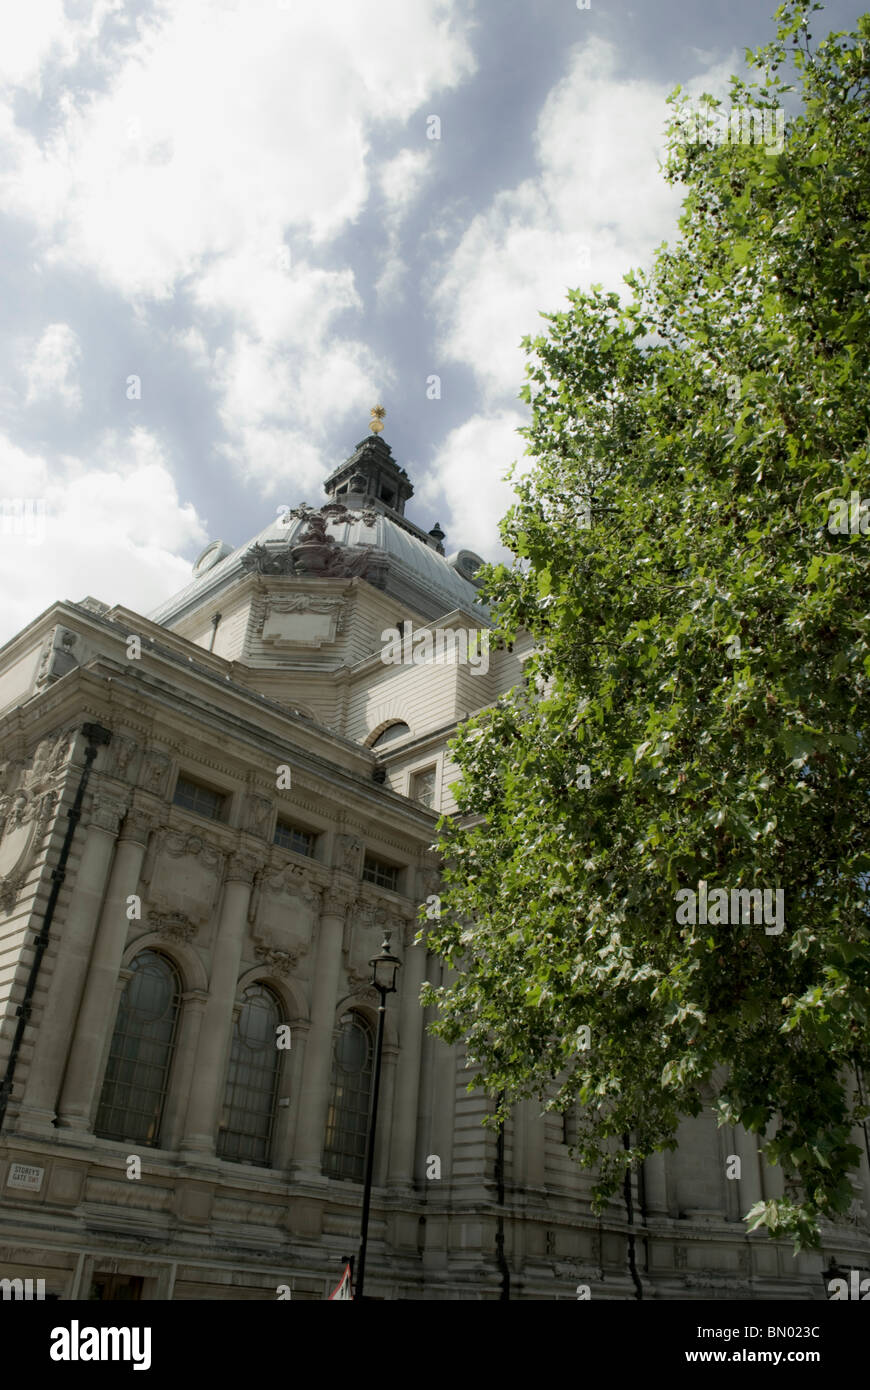 Central Methodist Hall in London against the cloudy sky Stock Photo